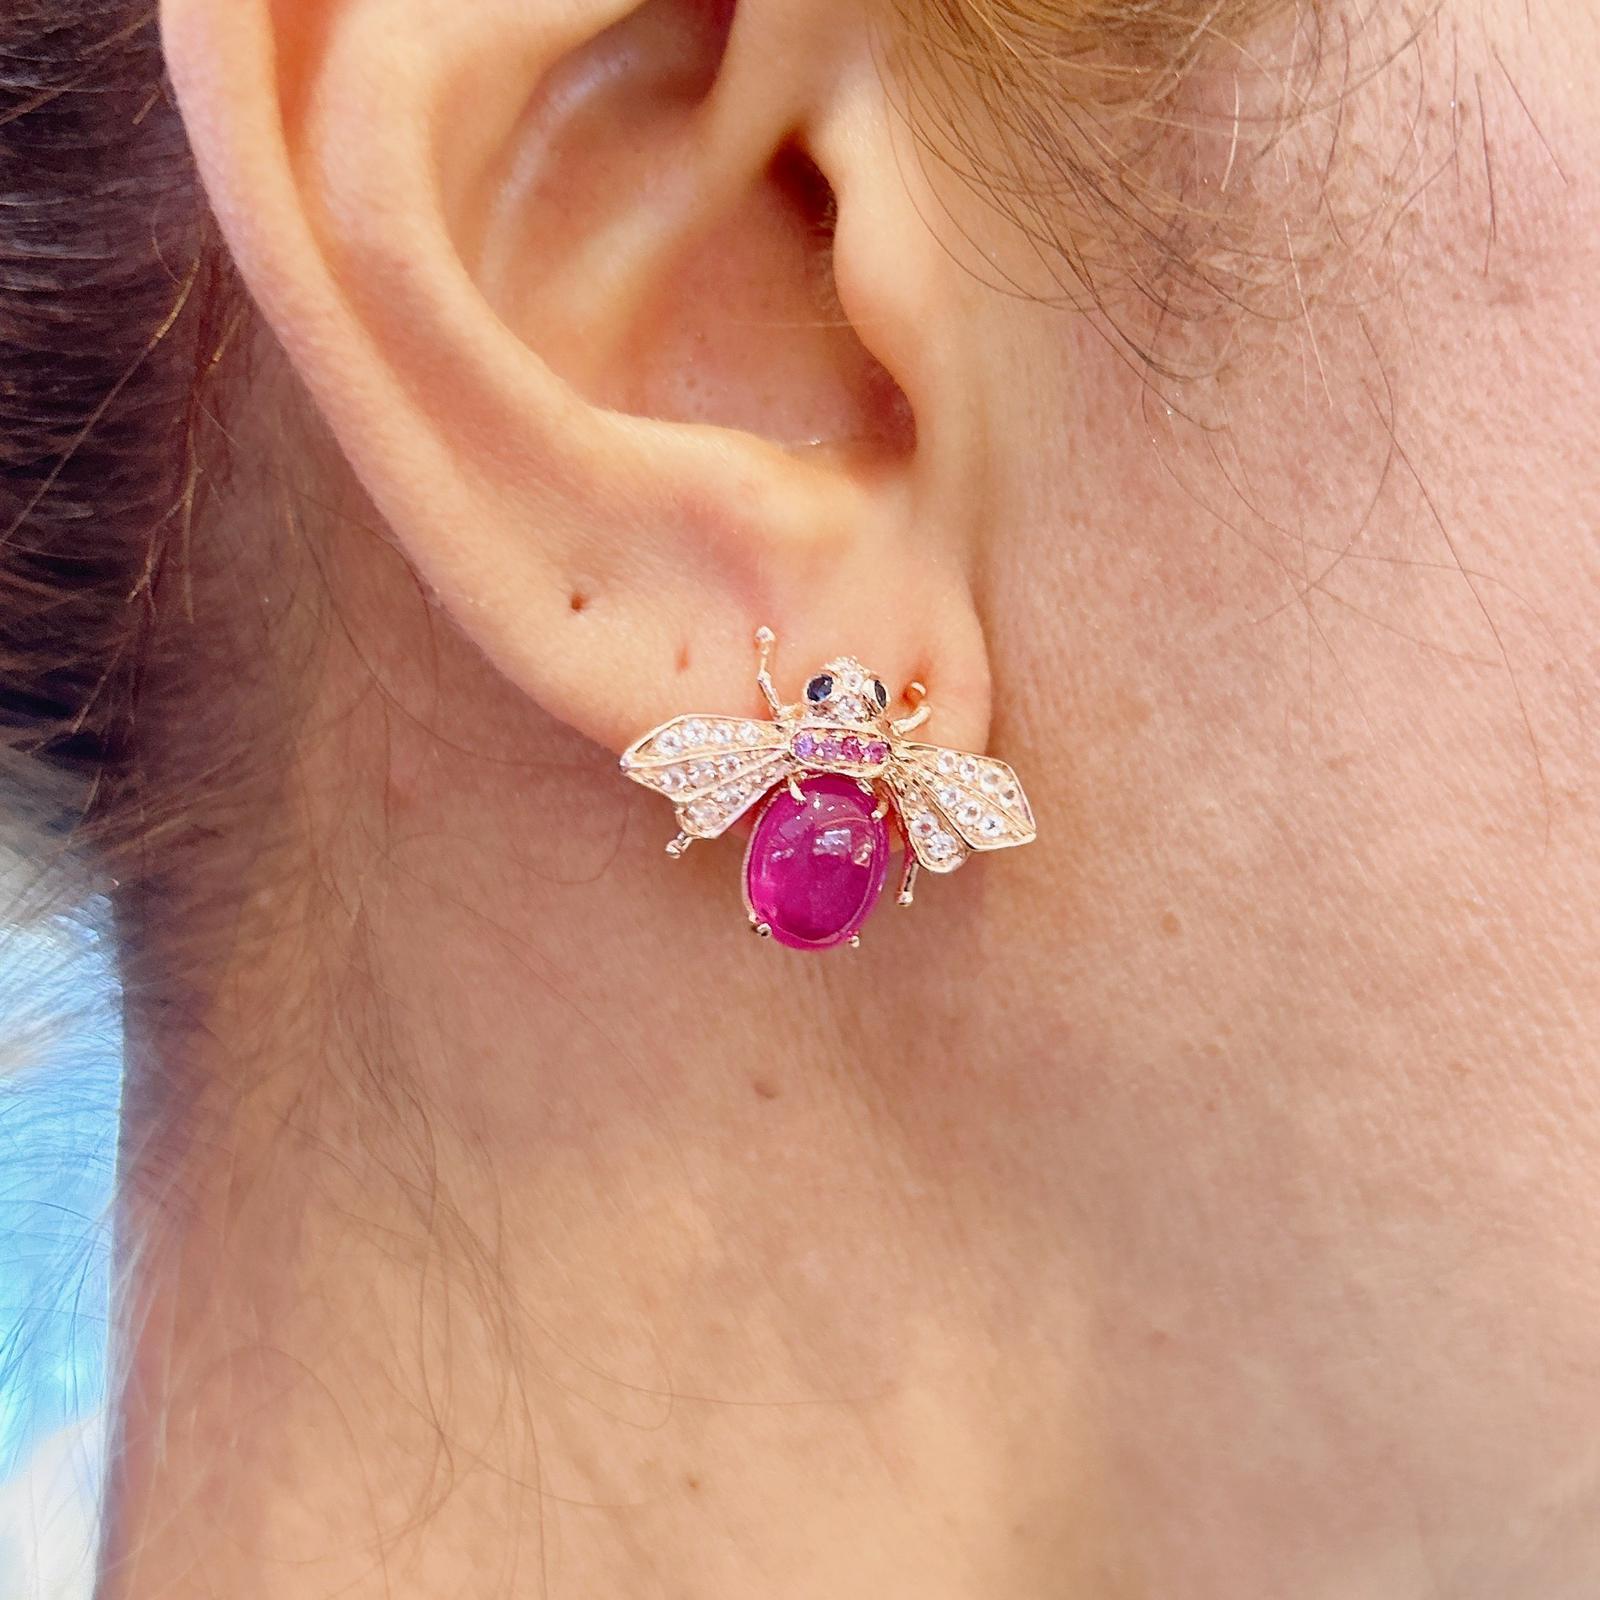 Bochic “Orient” Ruby Earrings with White Topaz & Blue Sapphire Set in 22k Gold In New Condition For Sale In New York, NY